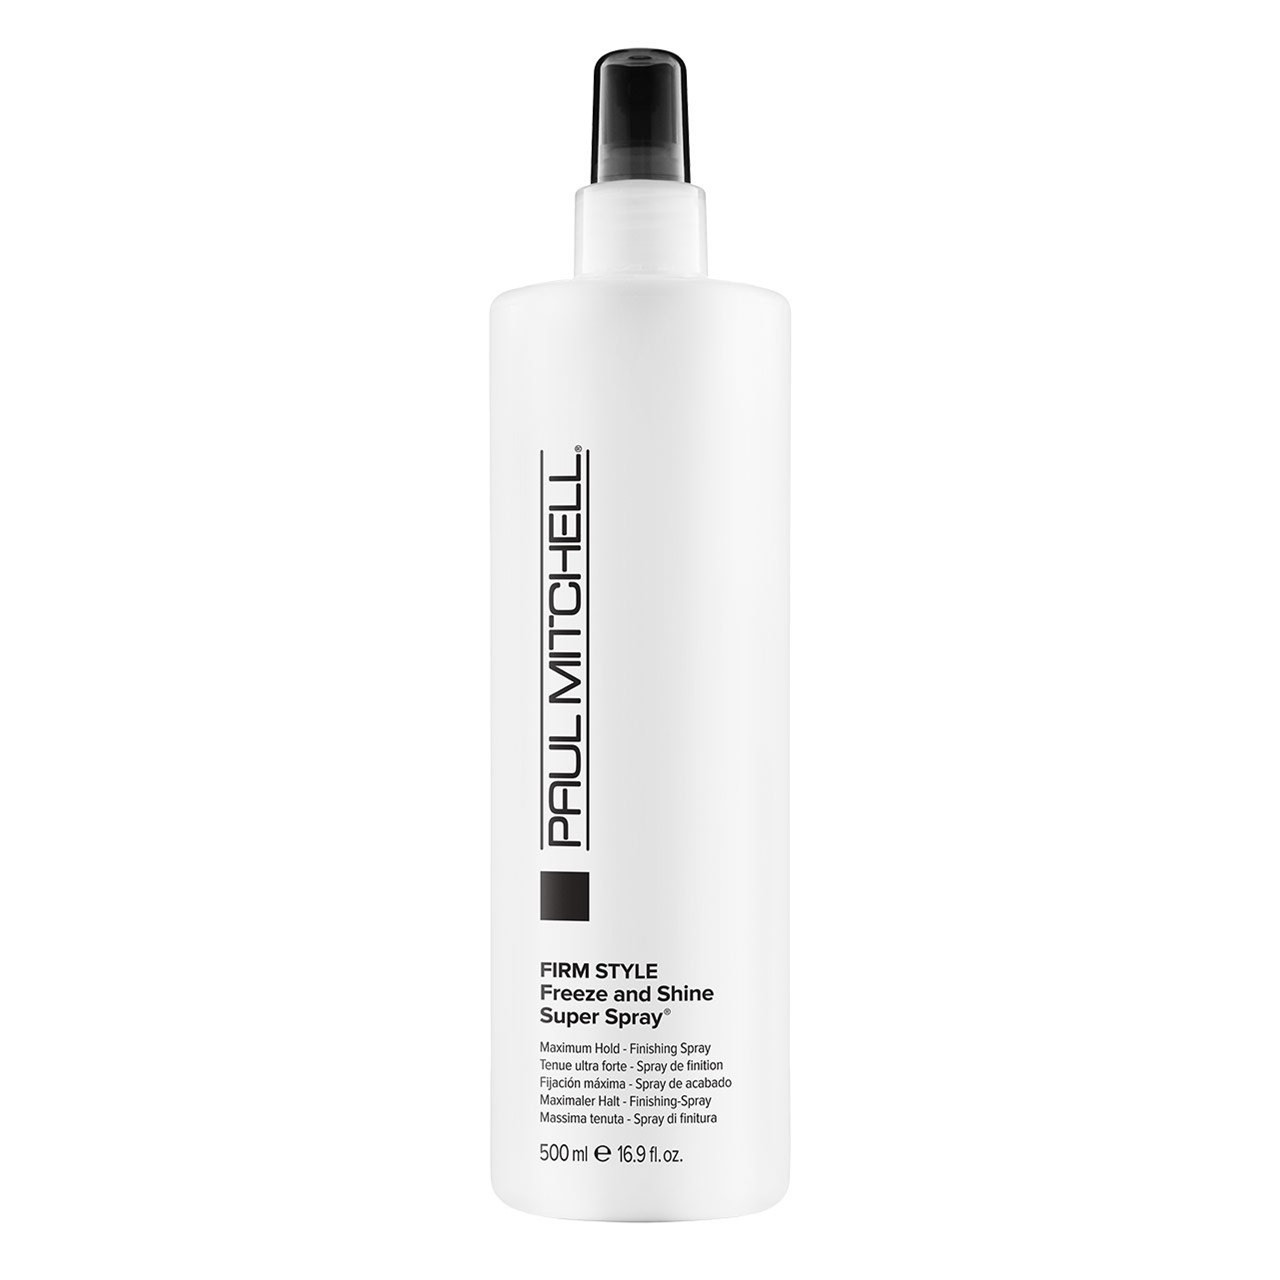 PAUL MITCHELL Firm-Style Freeze and Shine Super Spray 500ml